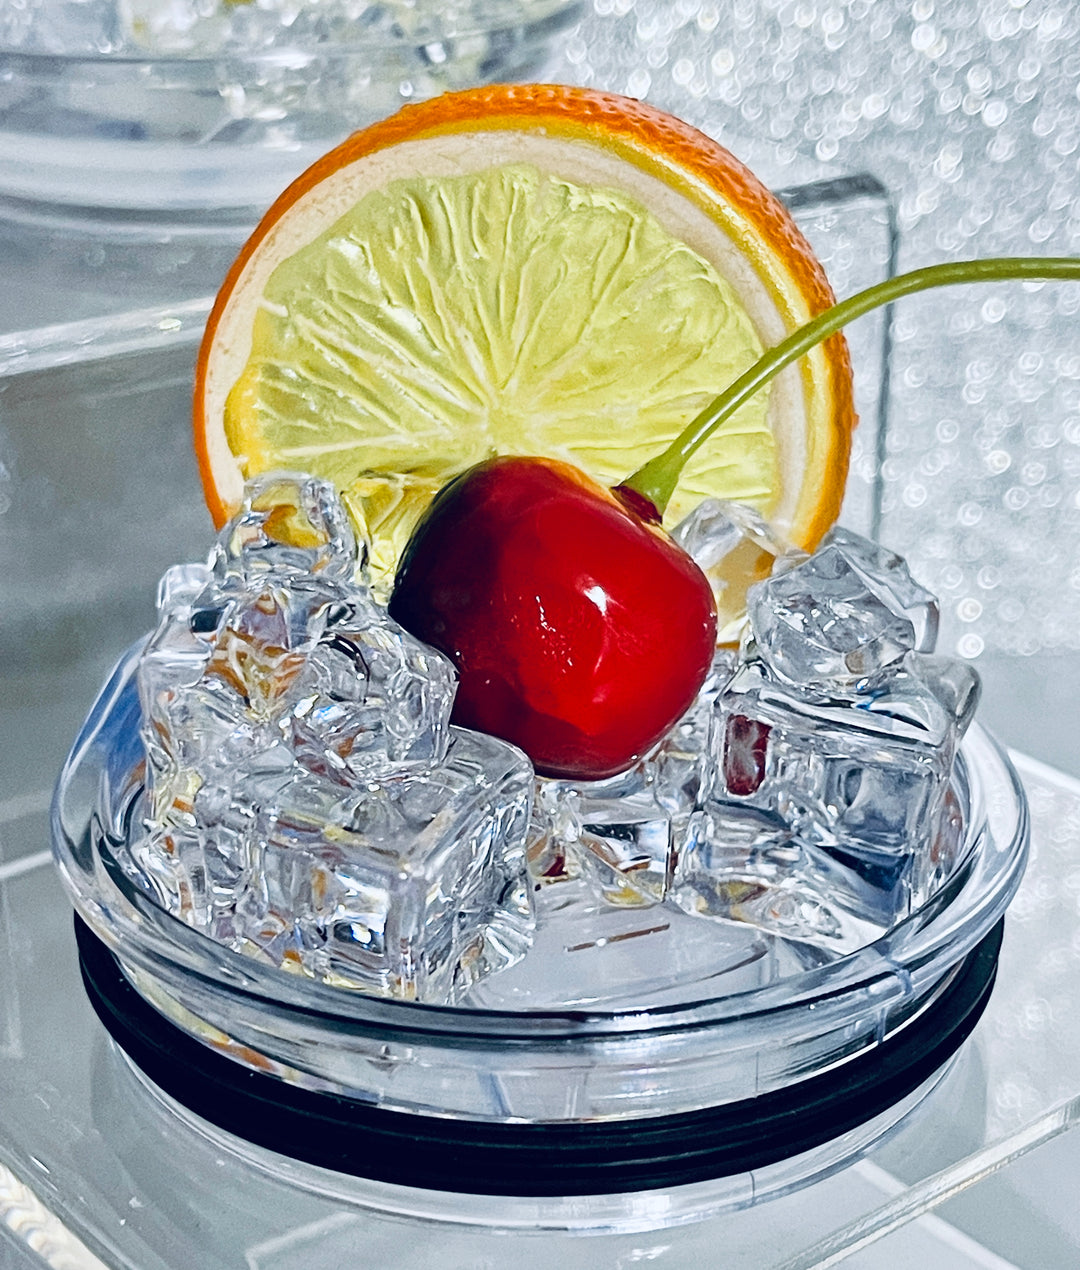 Orange Slice + Cherry - Fruit Tumbler Toppers - Decorative Lid for Tumblers - Ice Topper Lid